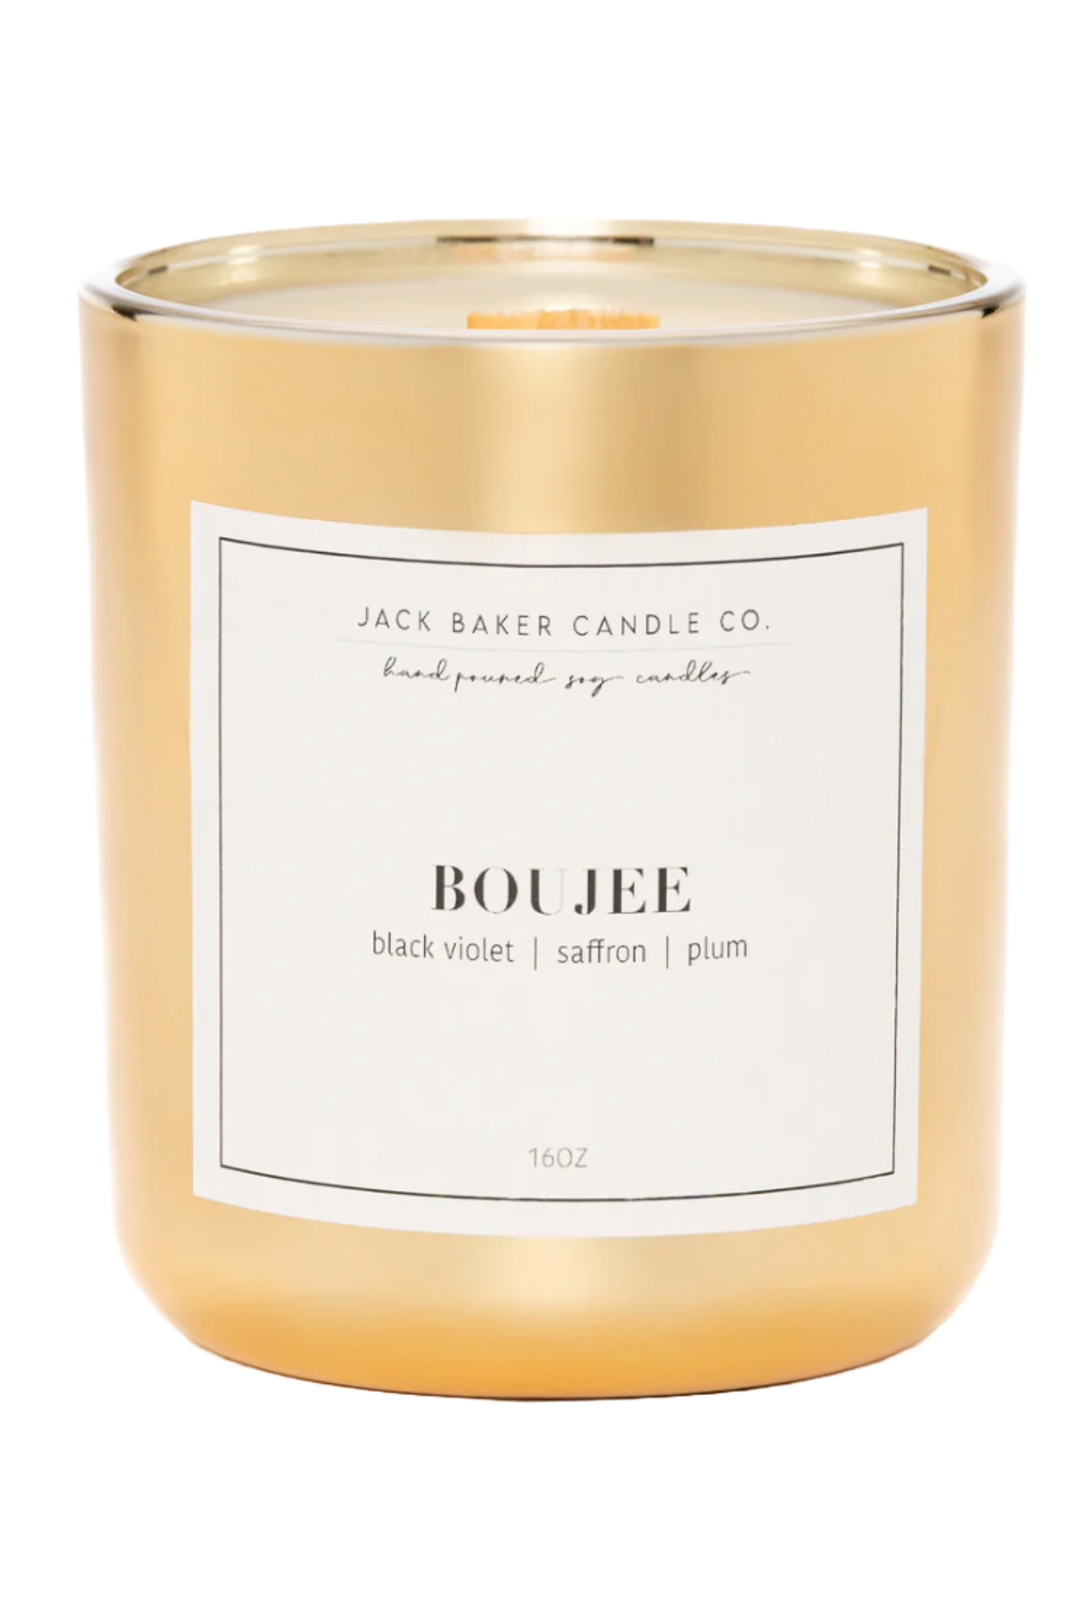 "Boujee" Candle